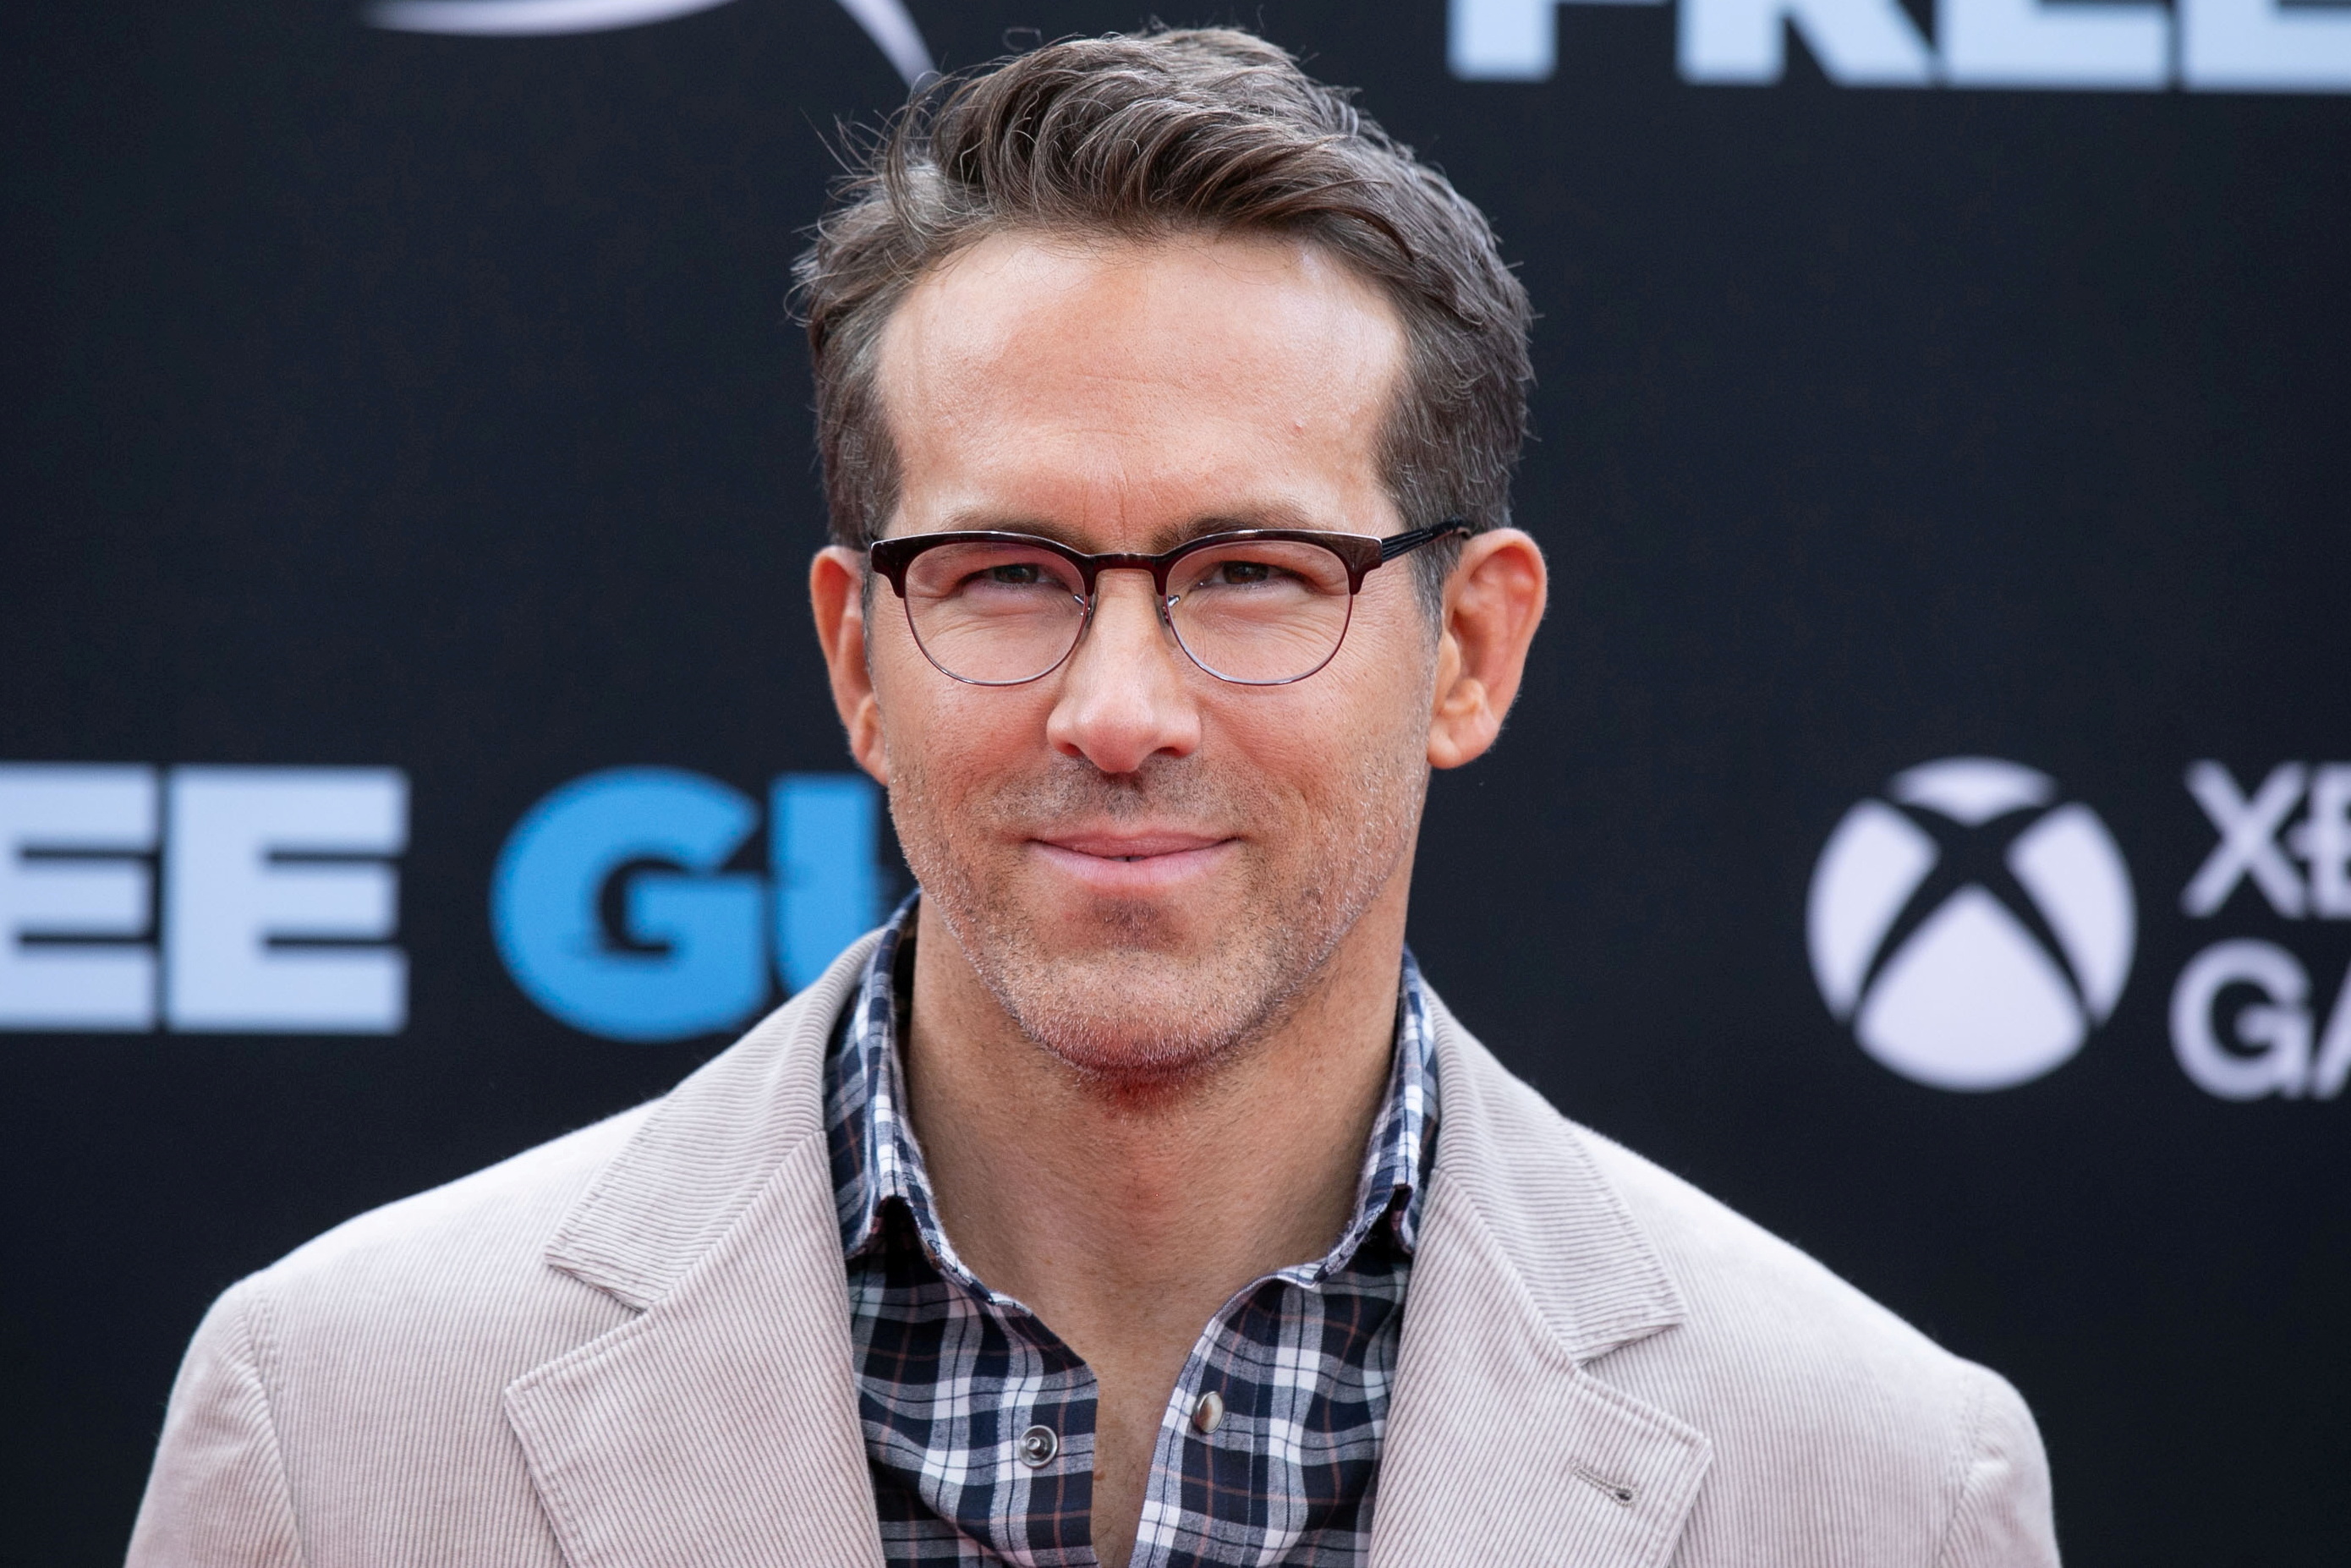 Actor Ryan Reynolds poses at the premiere for the film 